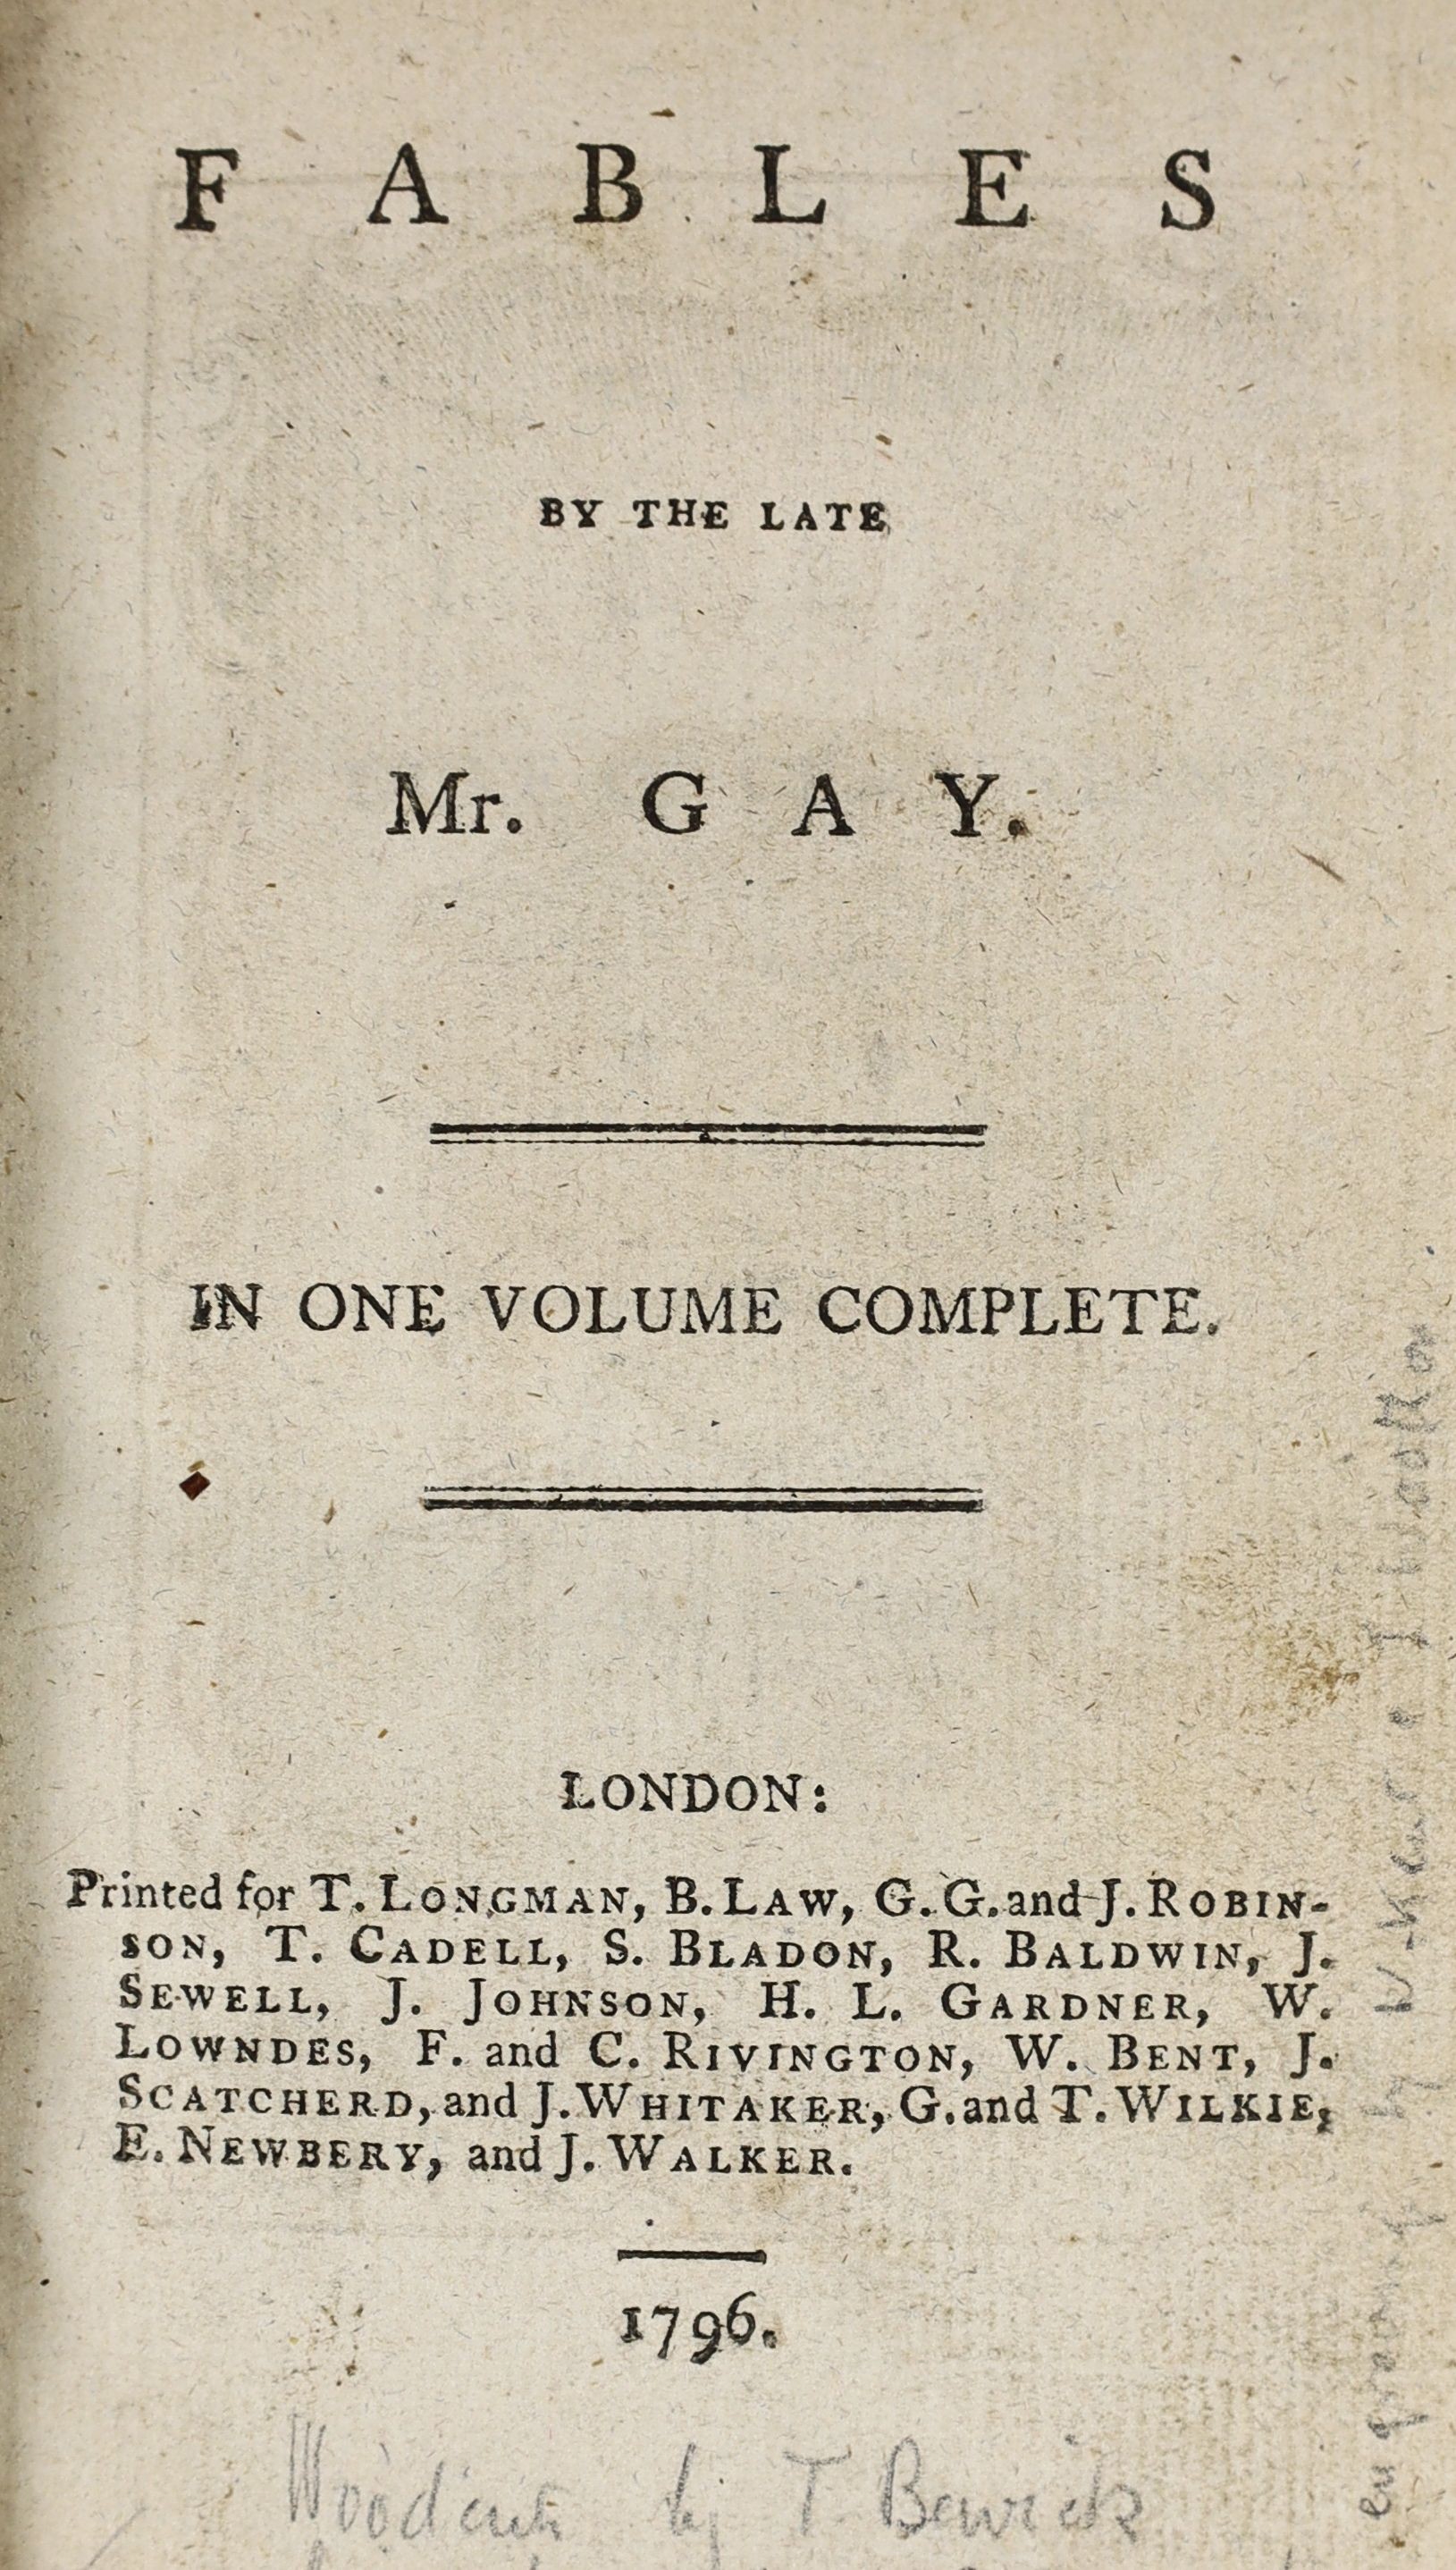 Gay, John - Fables, 2 parts in 1, 12mo, calf, illustrated with woodcuts by Thomas Bewick, T. Longman et al, London, 1796 and a further edition, 12mo, calf, front board detached, C & J. Rivington et al, London, 1823 (2)